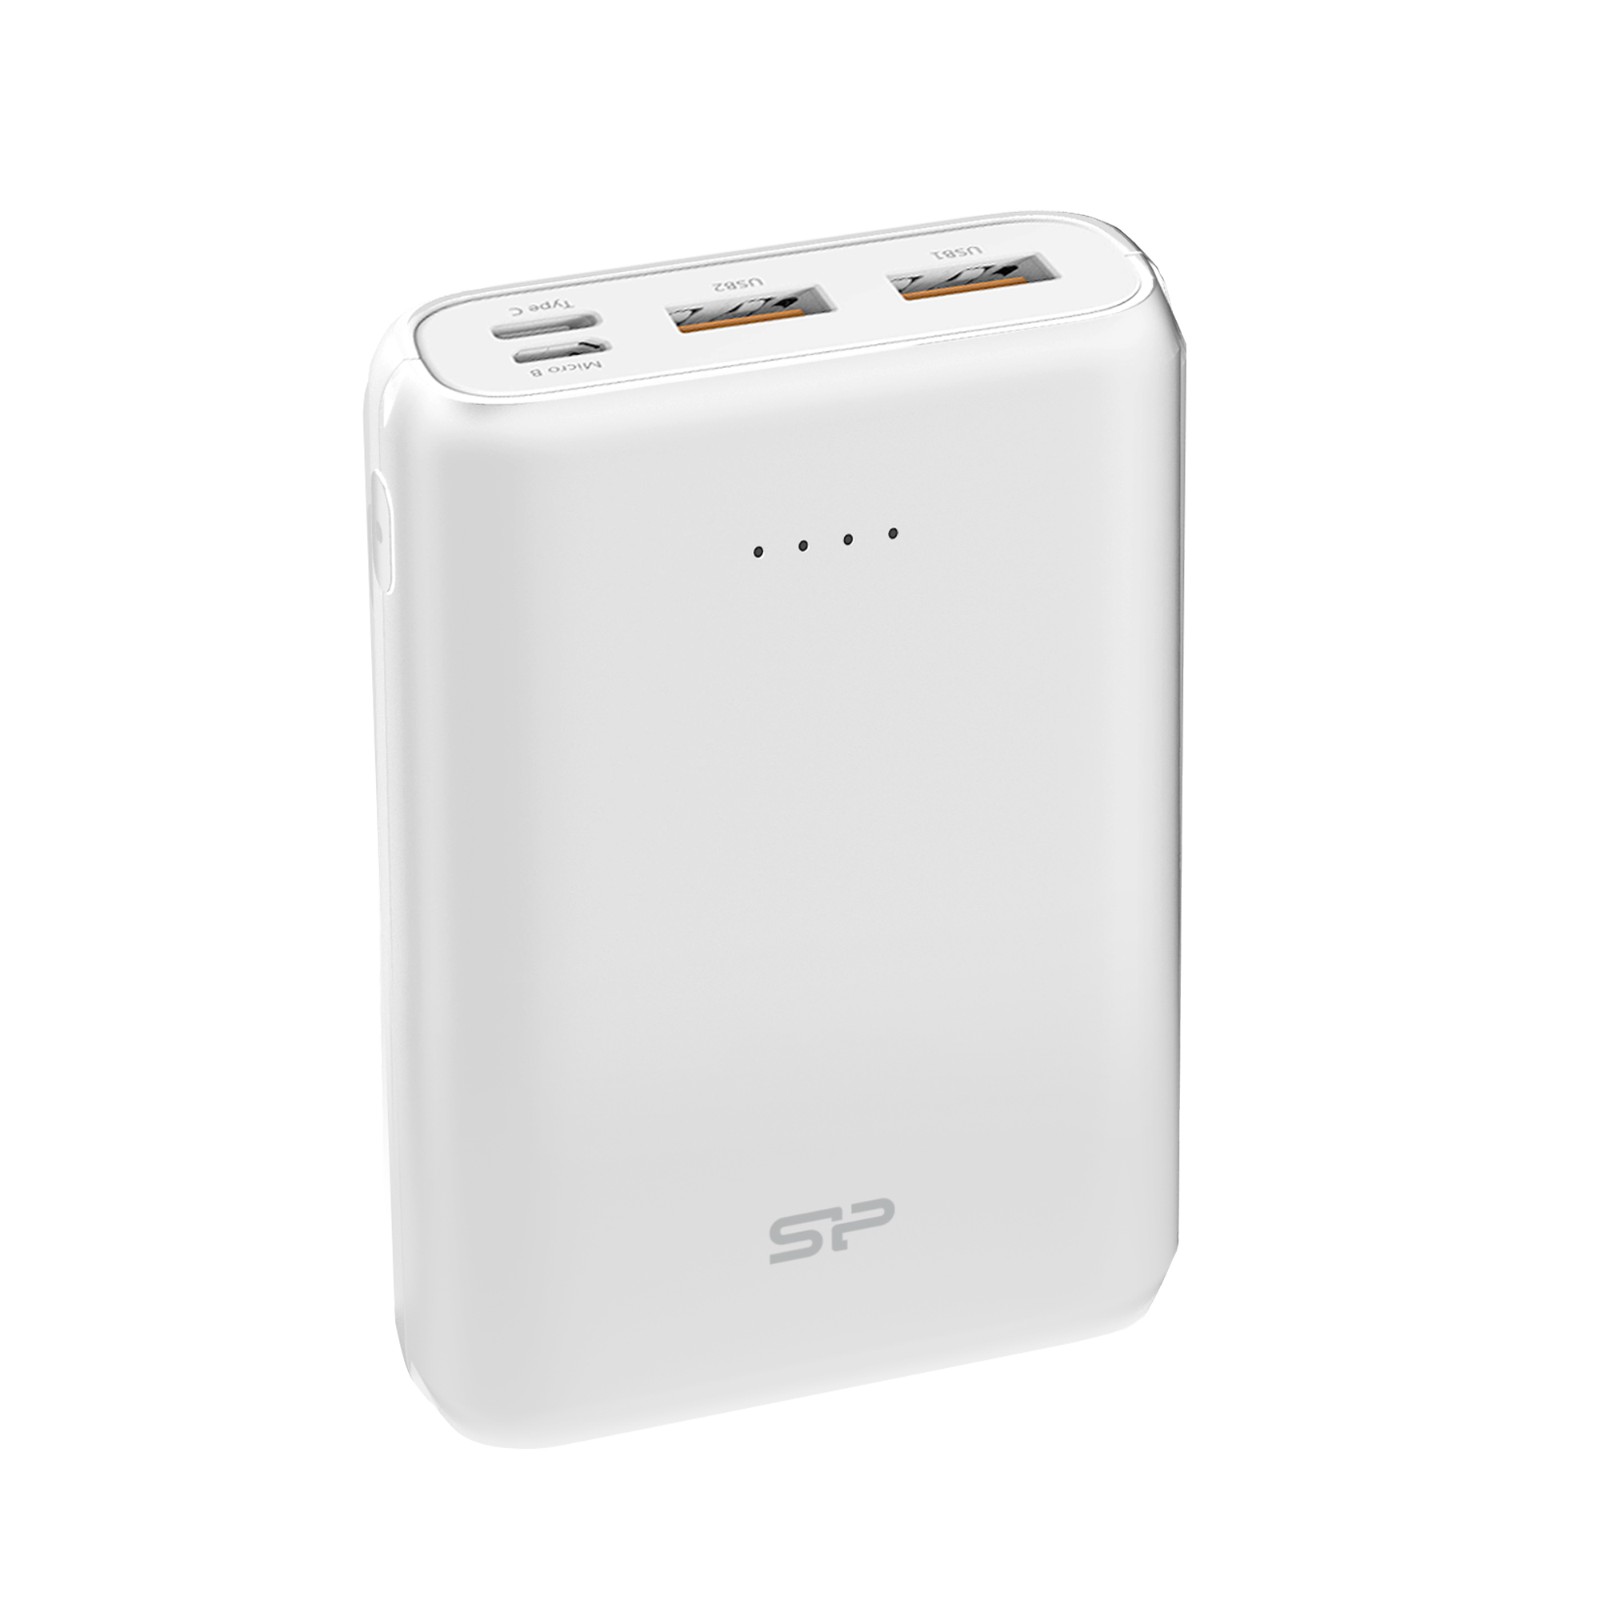 Silicon Power C10QC 10,000mAh Power bank, 18W PD & Quick Charge 3.0 USB C Portable Charger, White